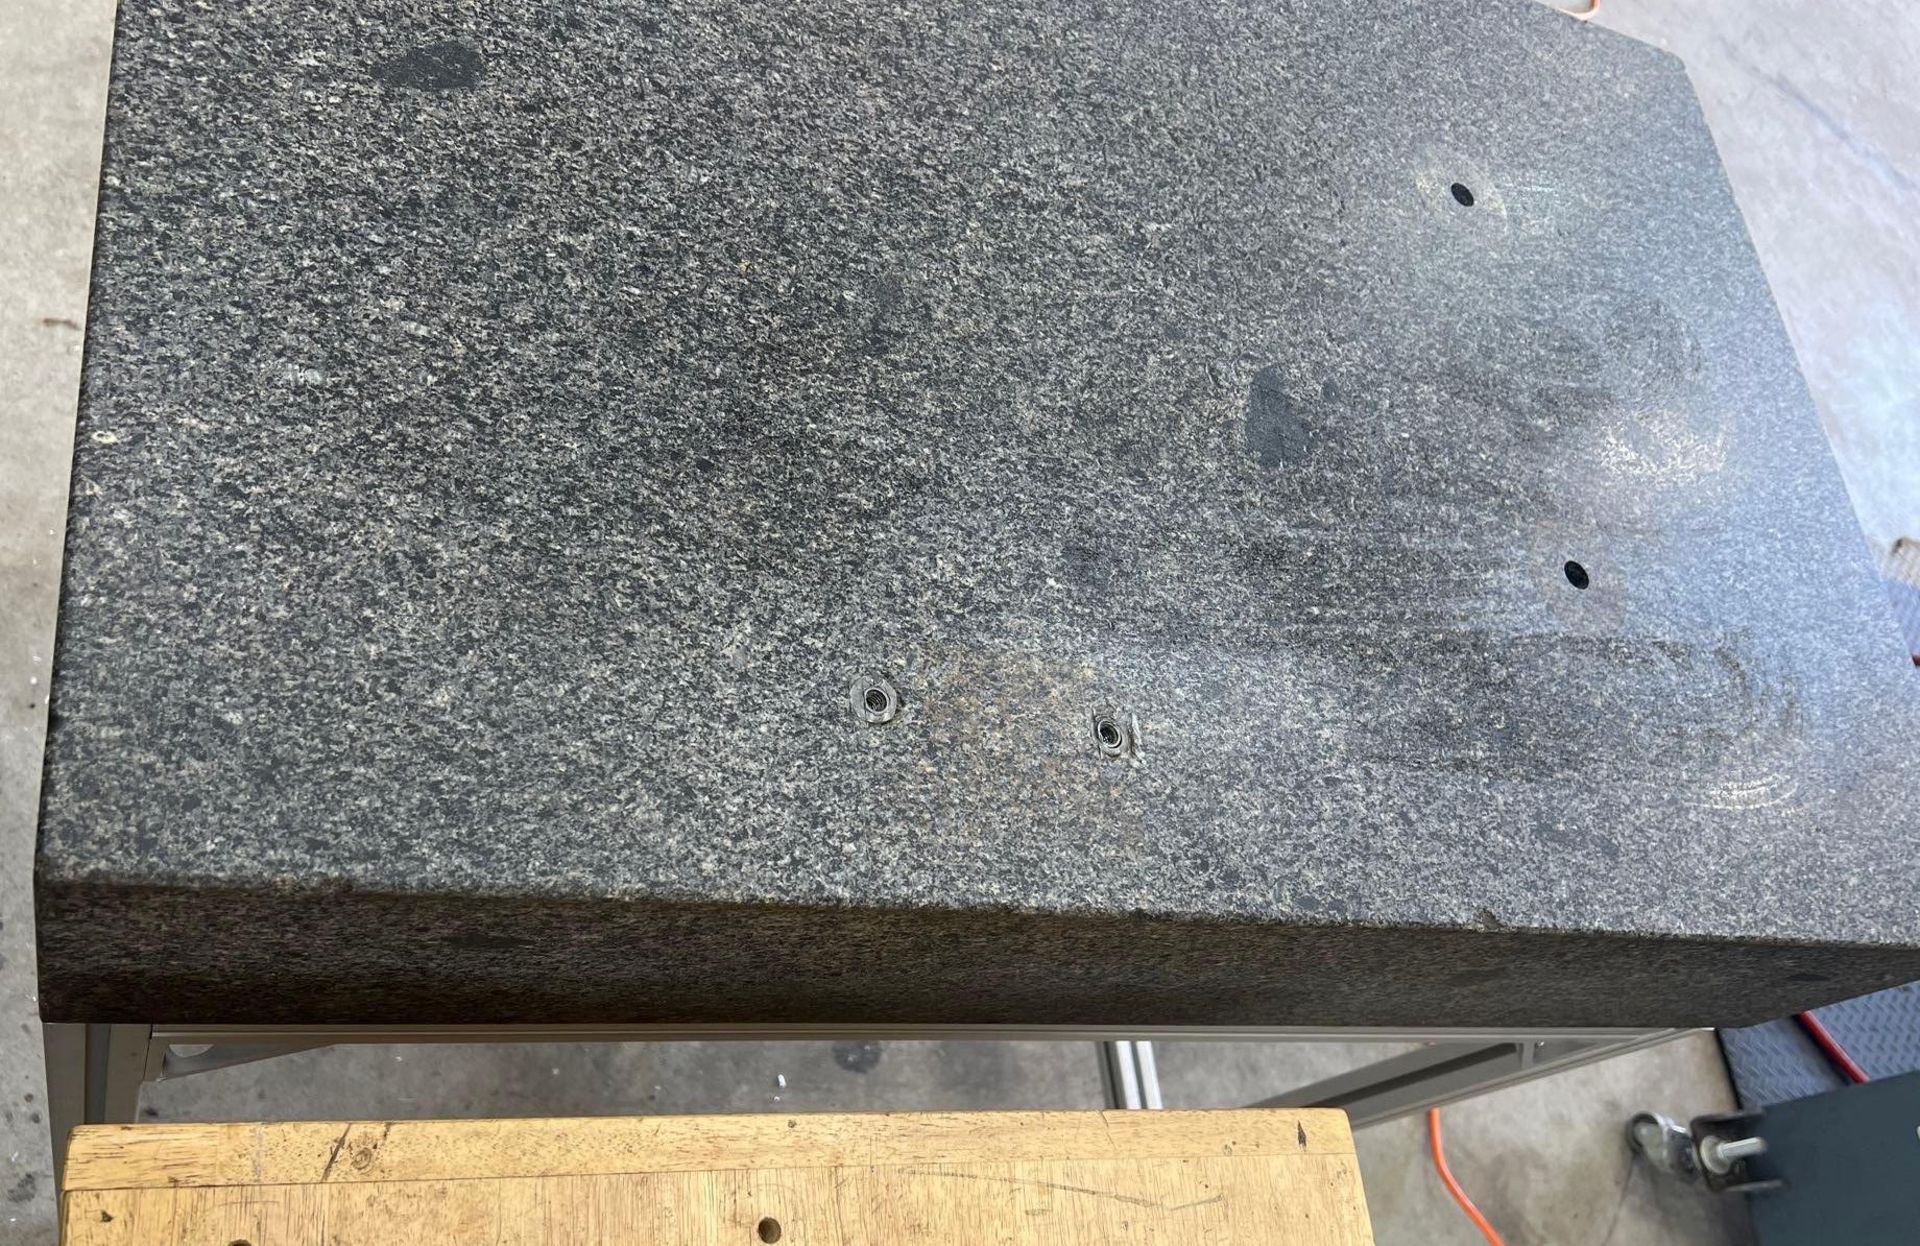 36"x24"x6" Granite Inspection Plate w/Stand - Image 4 of 8